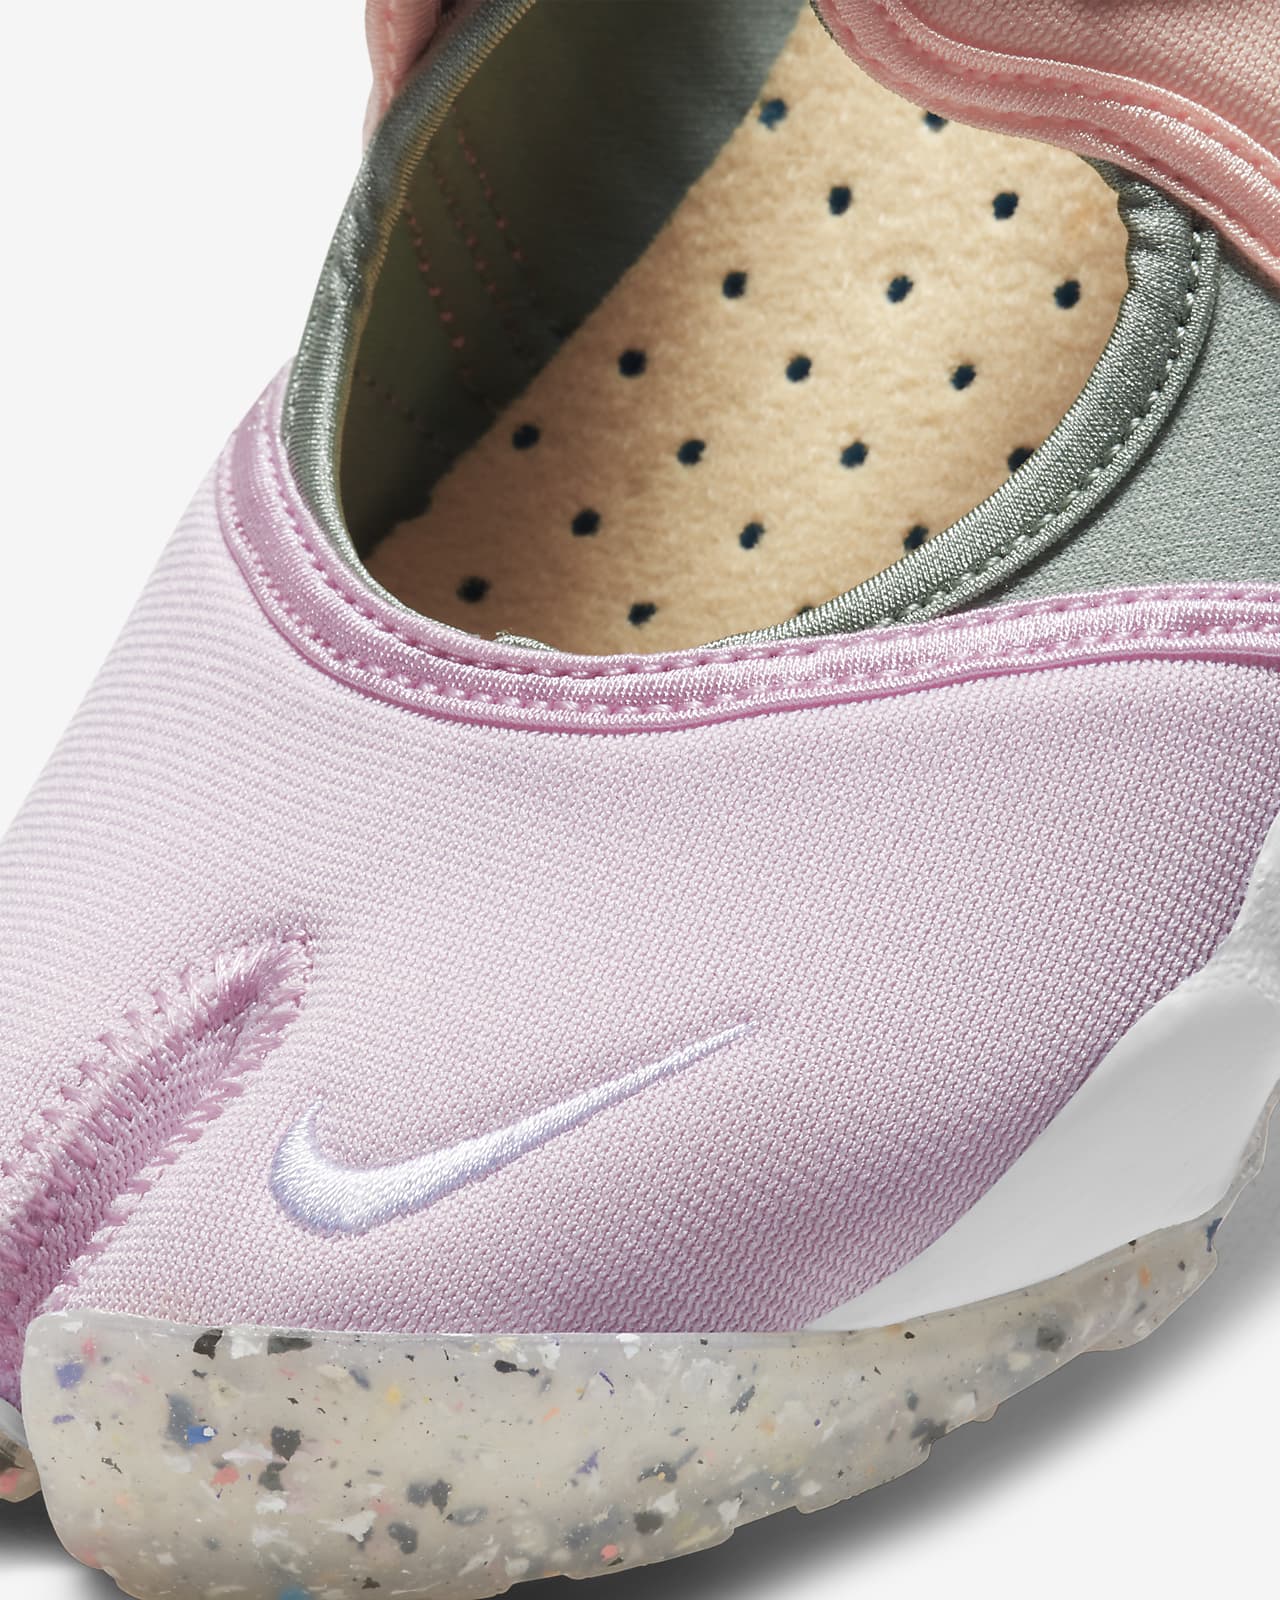 womens nike shoes with strap